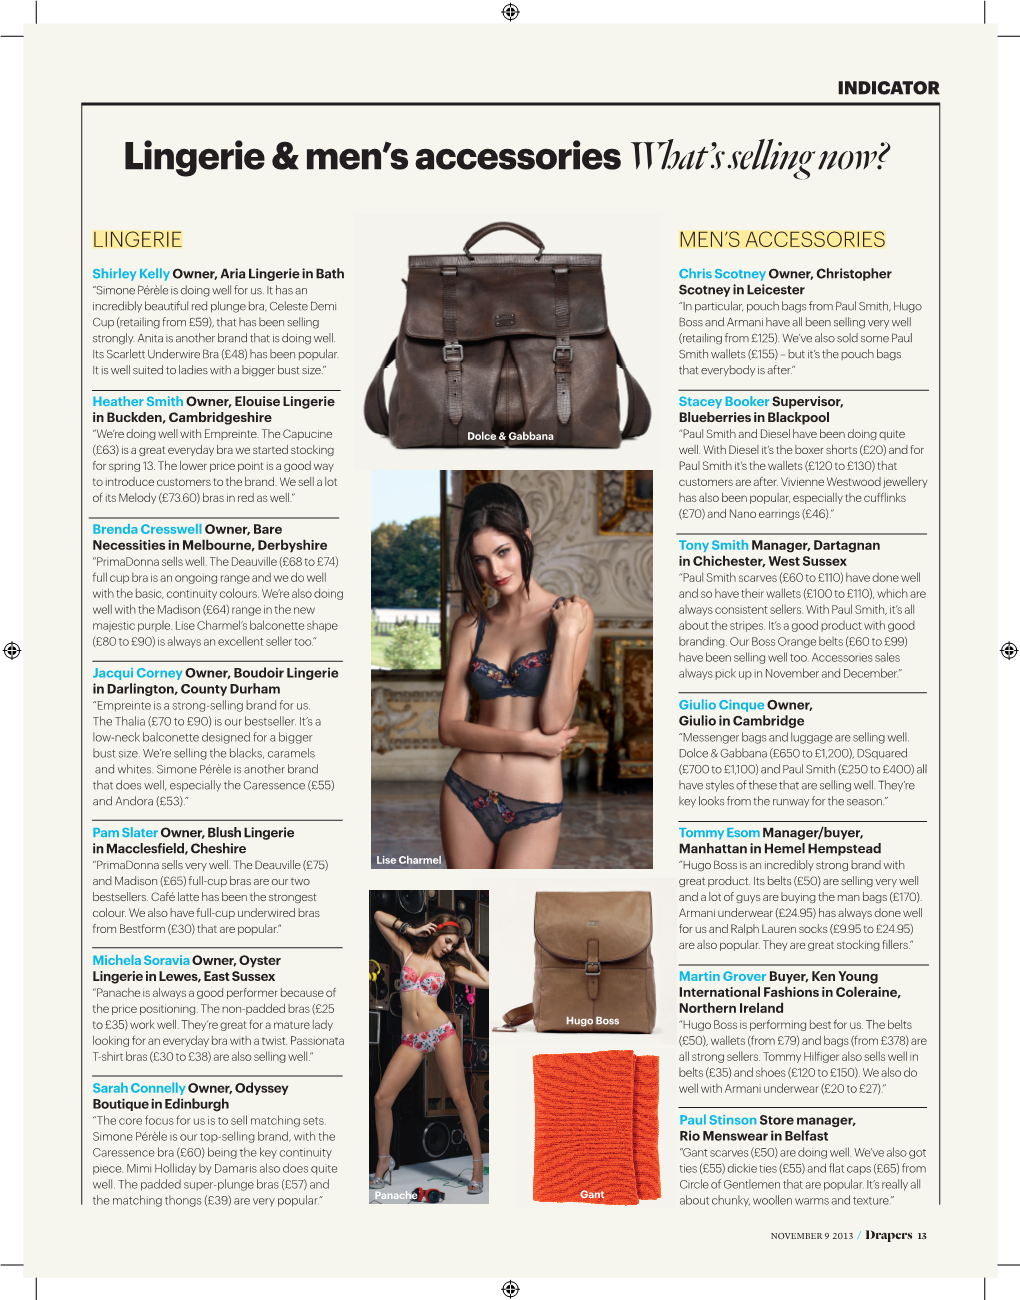 Lingerie & Men's Accessories What's Selling Now?